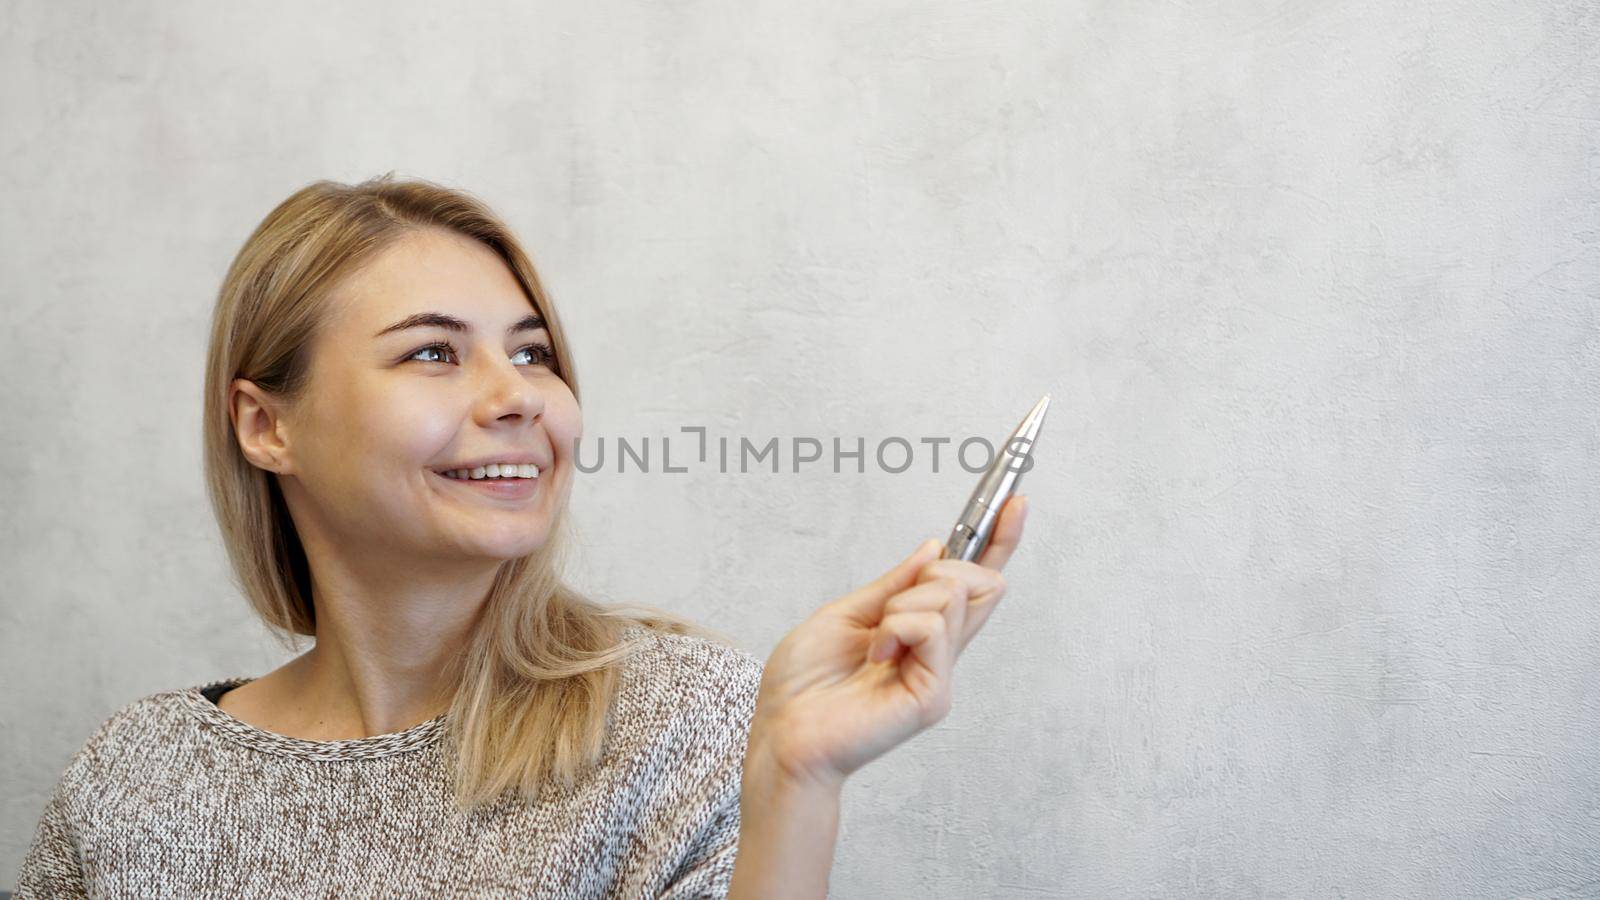 The woman shows with a pen on a gray wall. Place for information by natali_brill